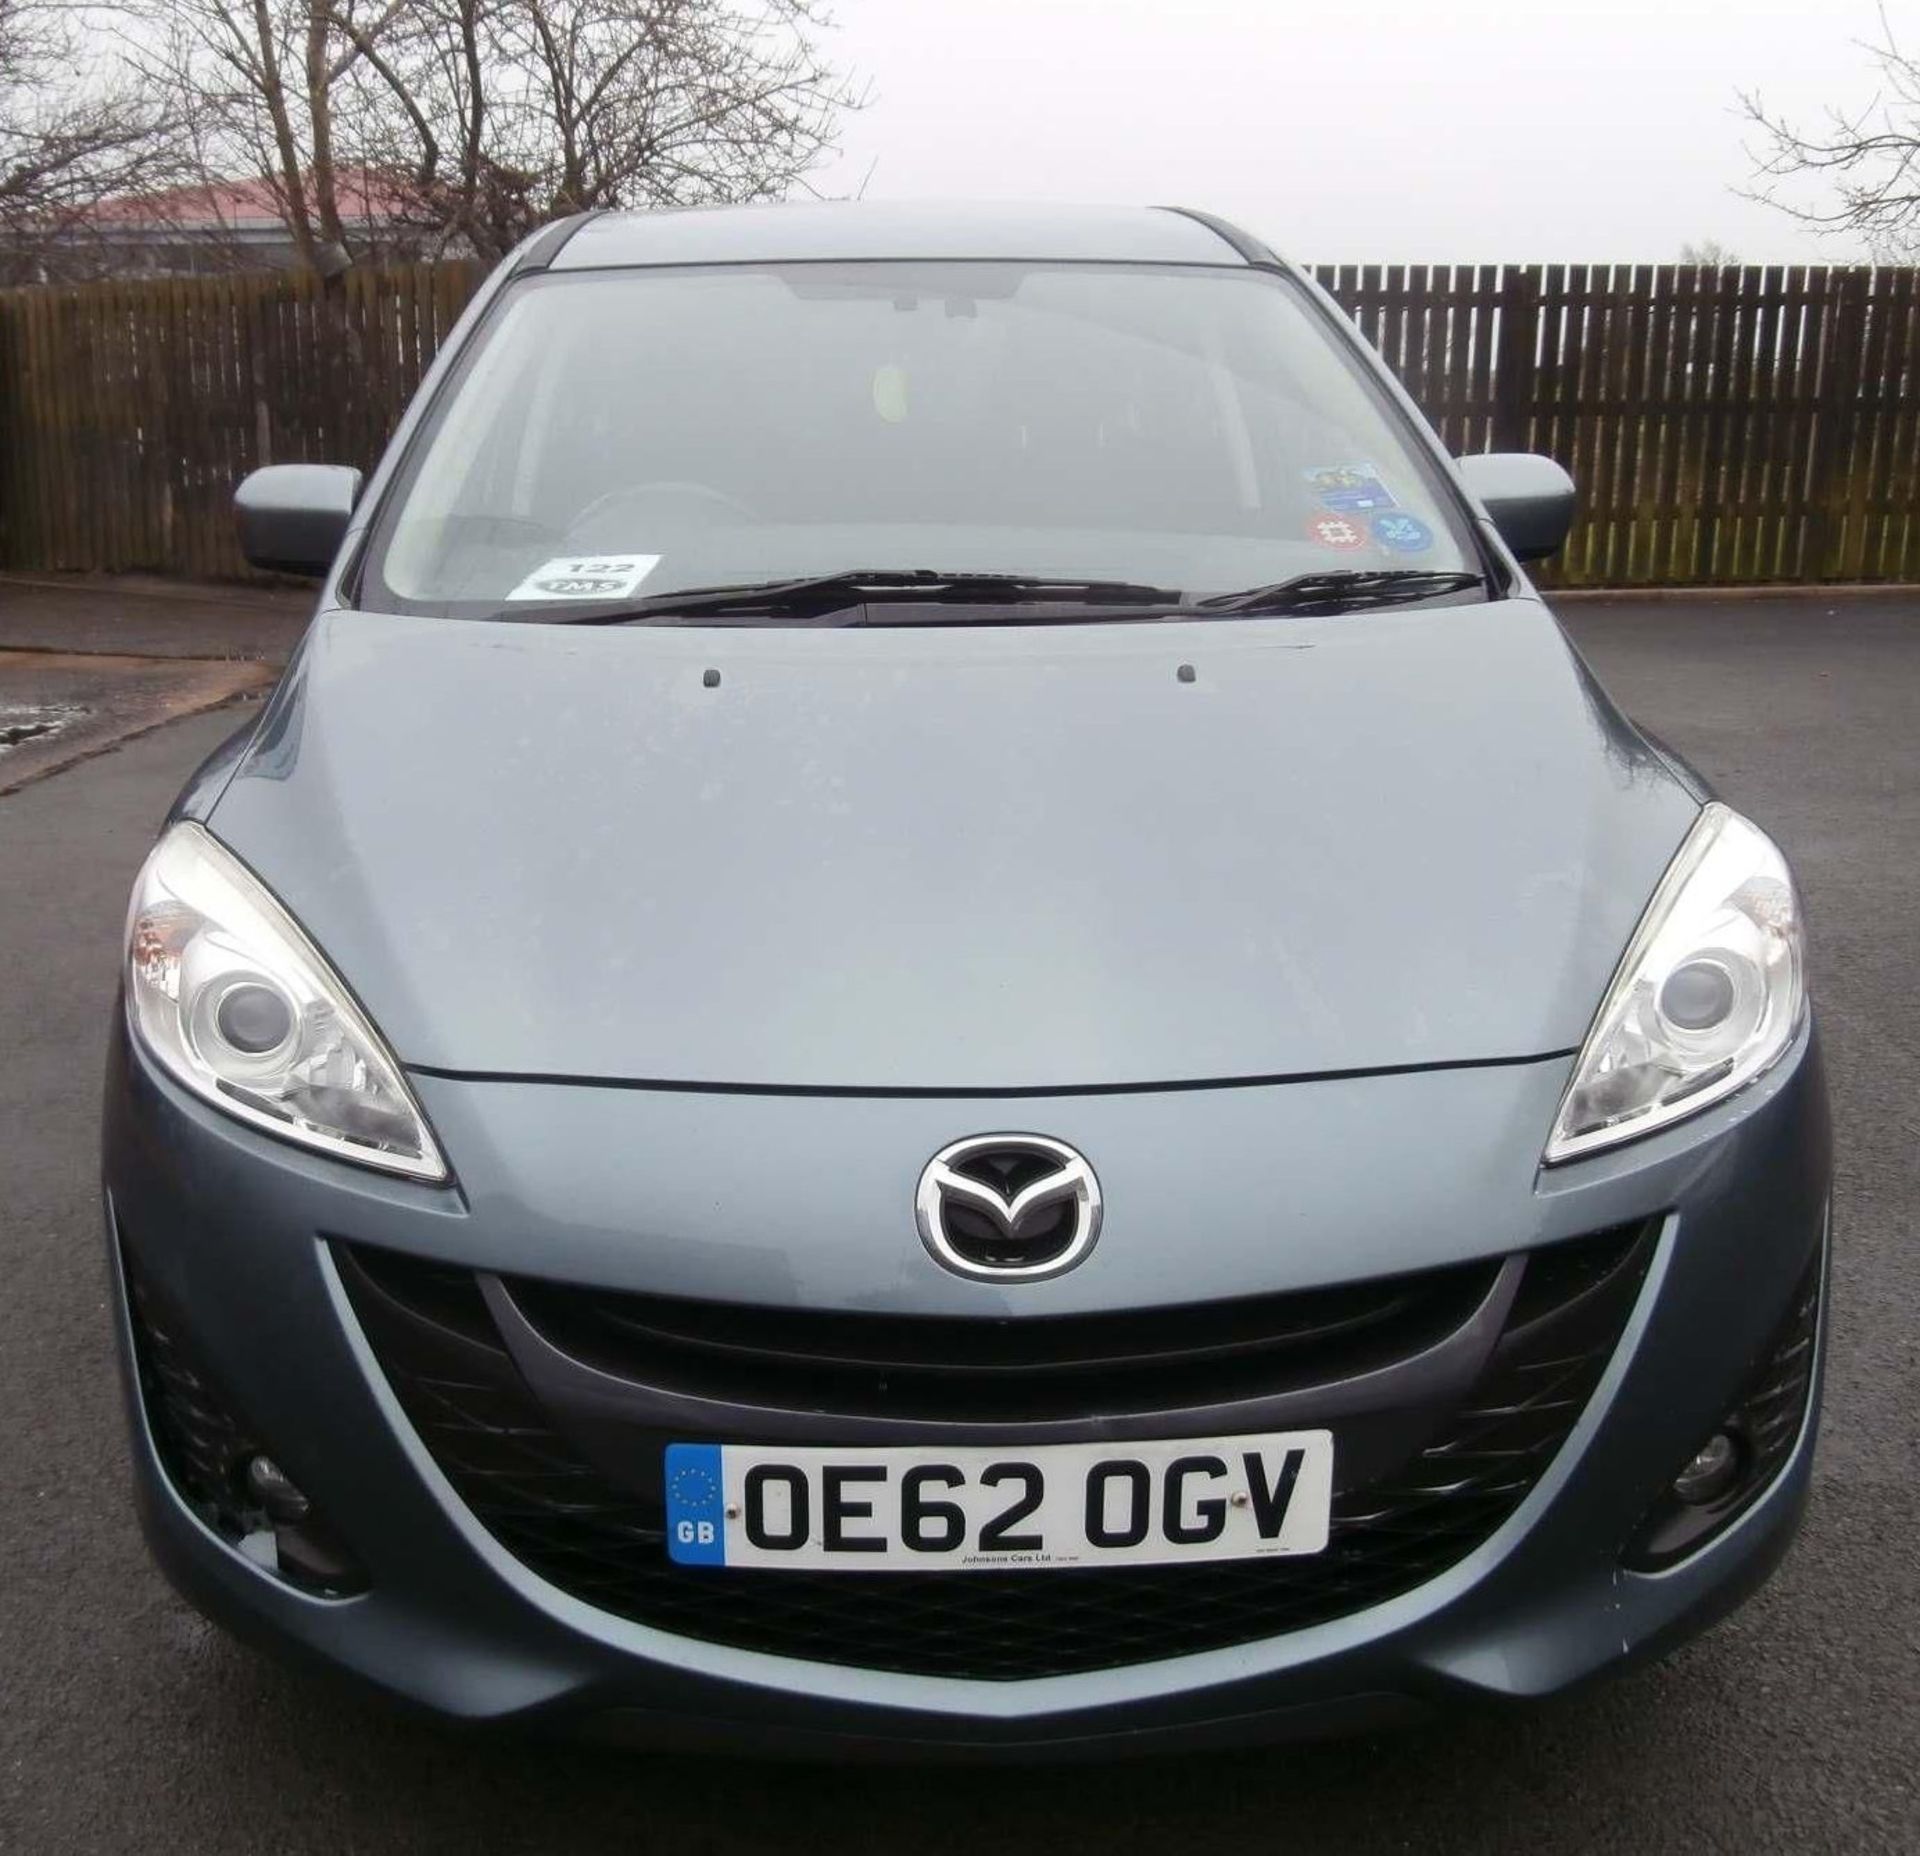 2013 Mazda 5 2.0 Venture Edition 5 Dr MPV - CL505 - NO VAT ON THE HAMMER - Location: Corby, N - Image 4 of 9